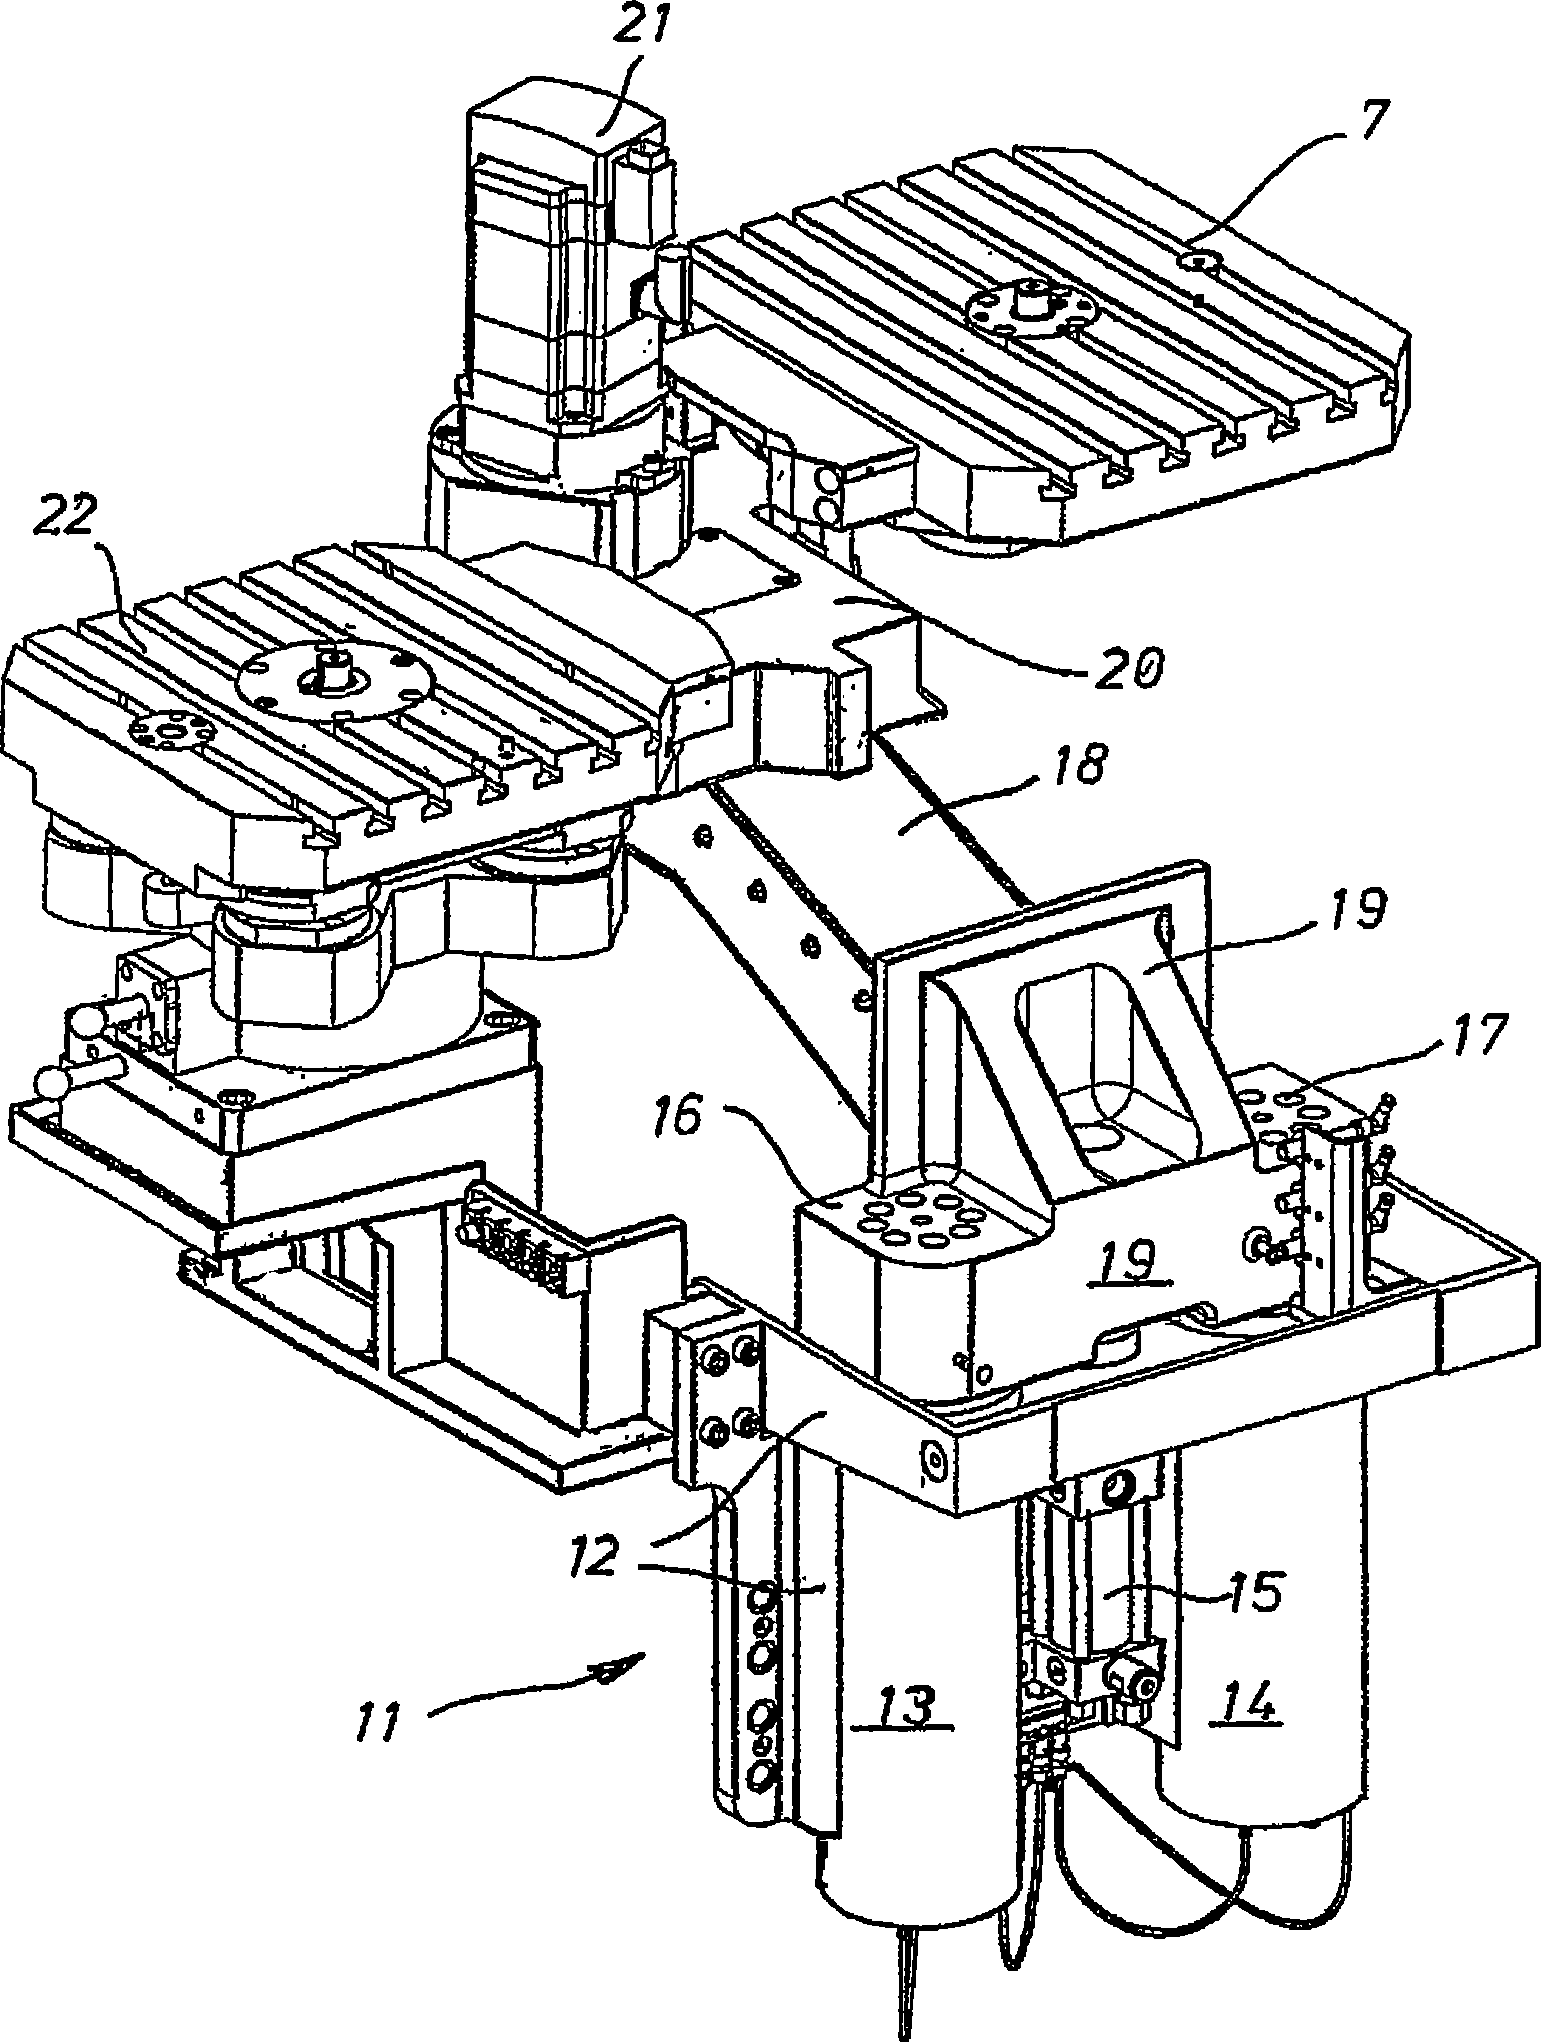 Milling and drilling machine comprising a pallet exchanger